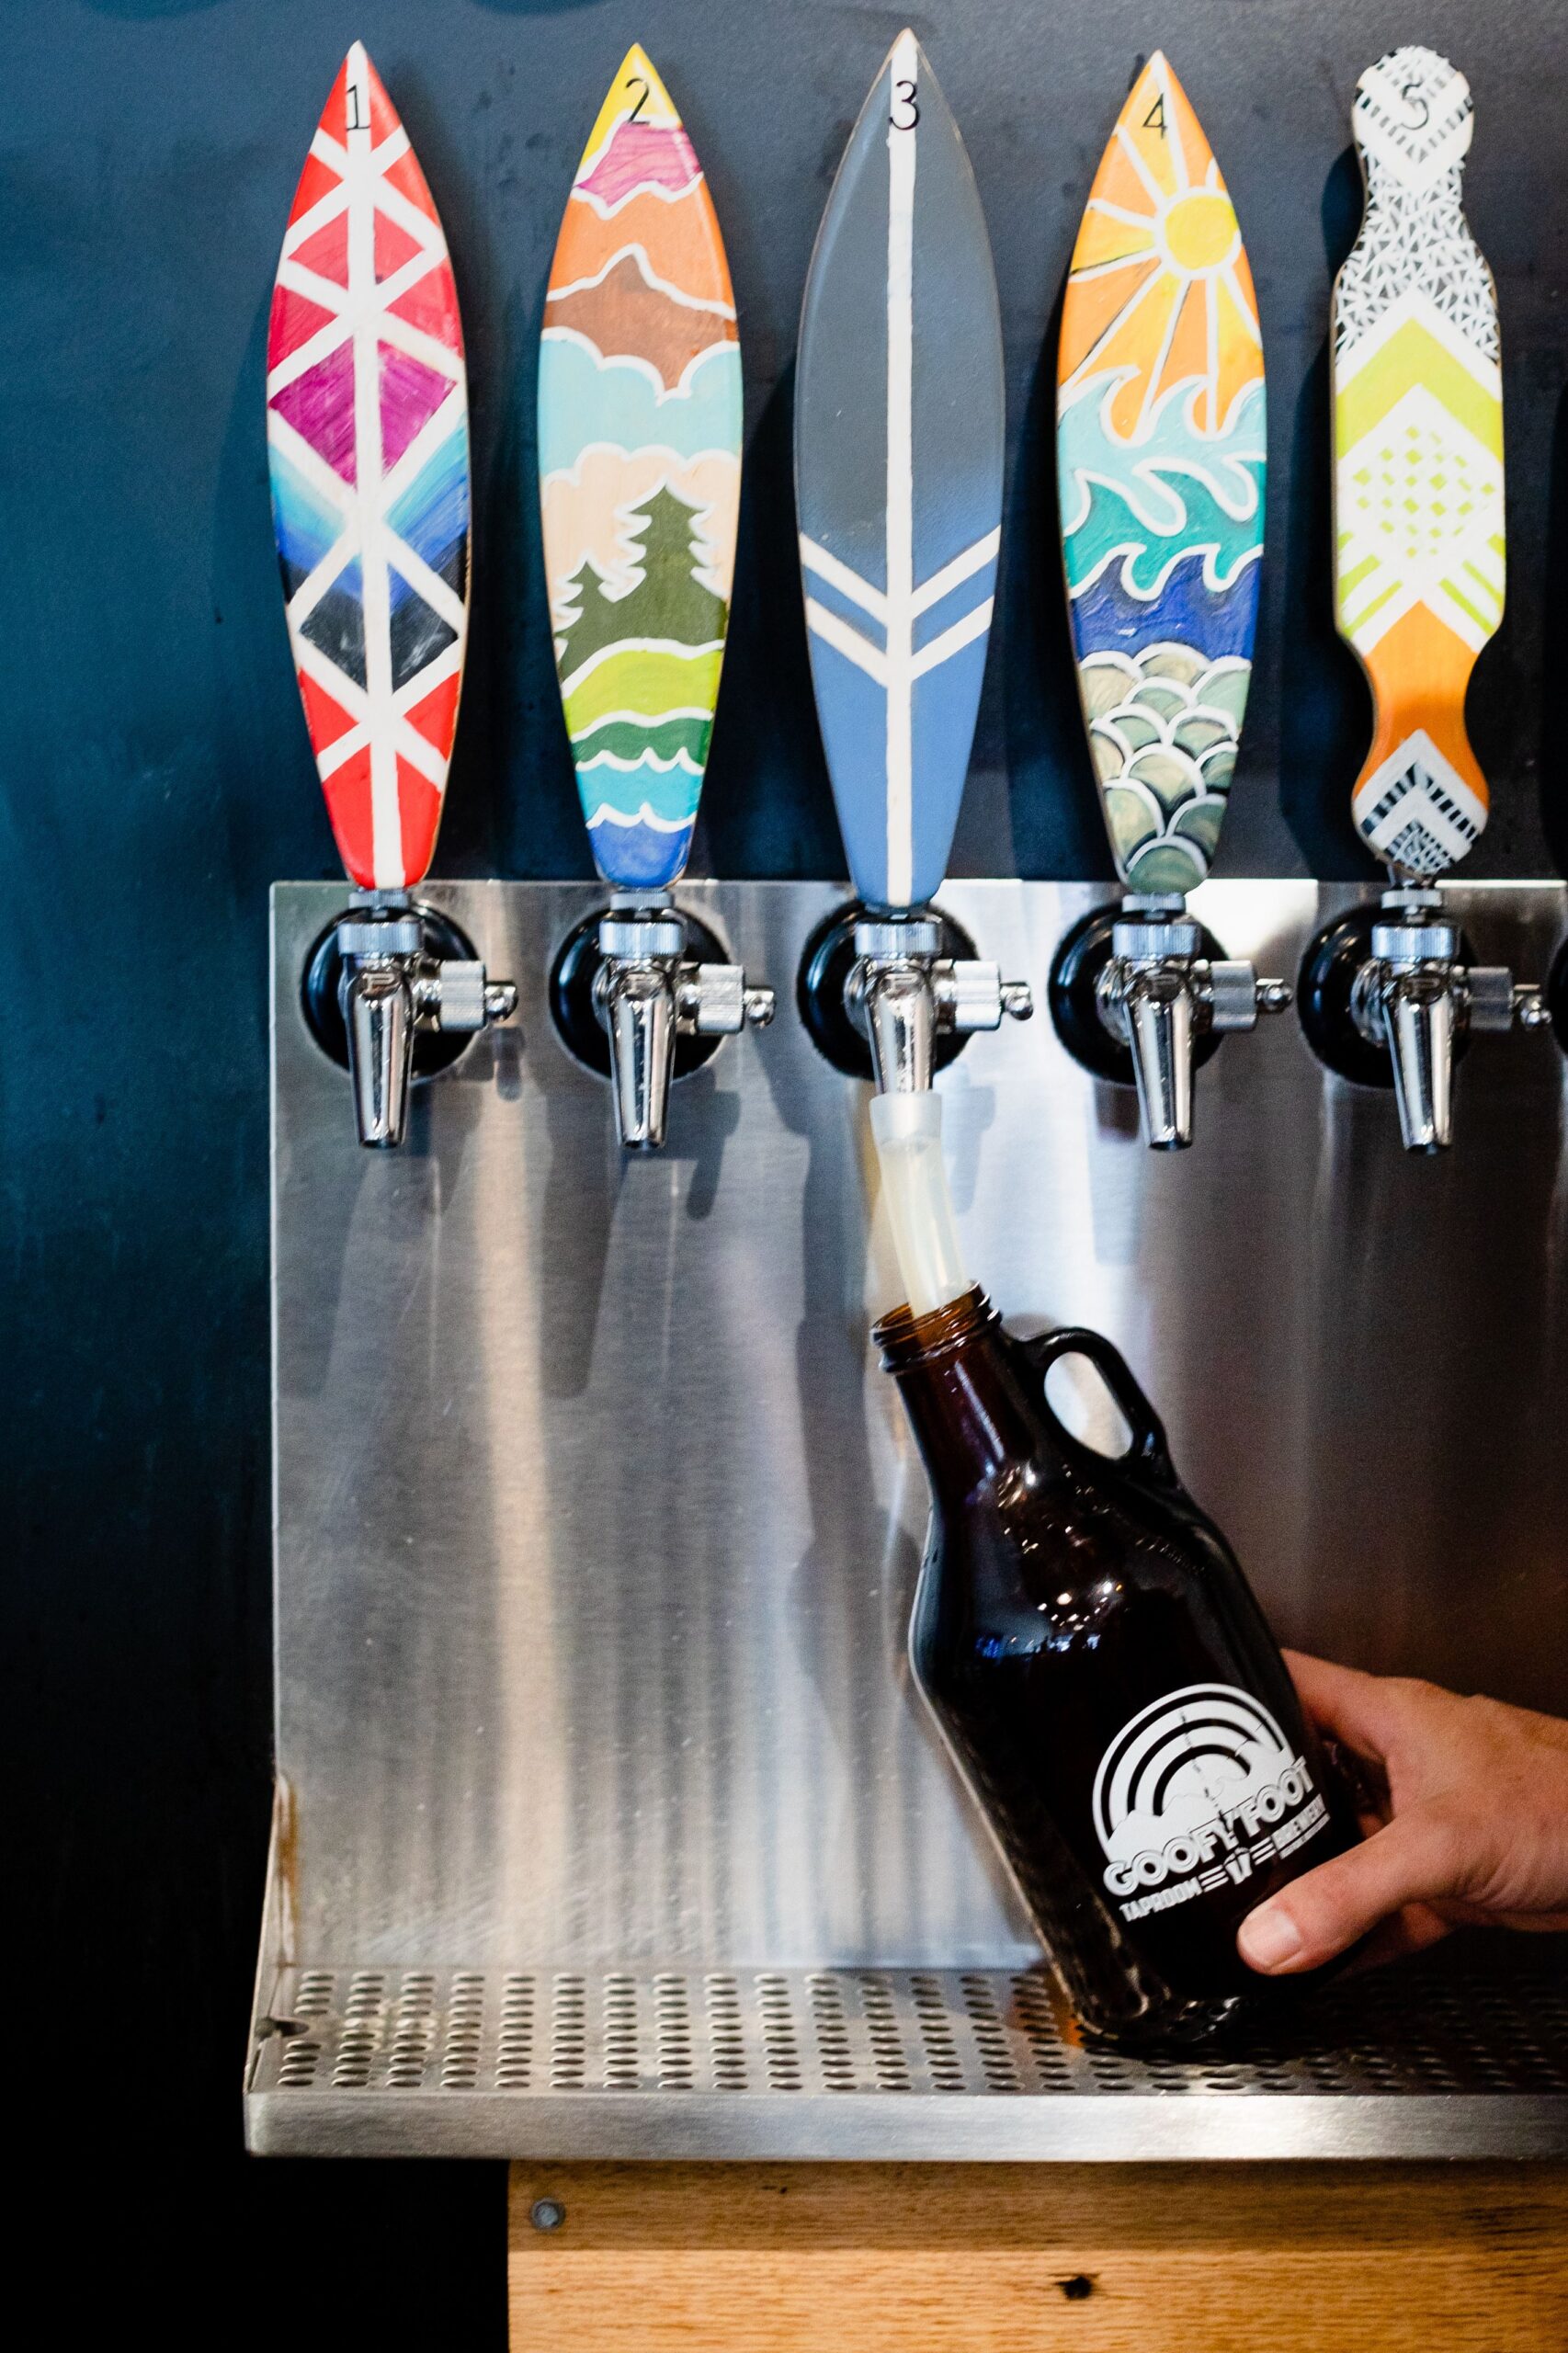 Someone fills up a growler from the beer taps at High Point brewery, Goofy Foot Taproom and Brewery.